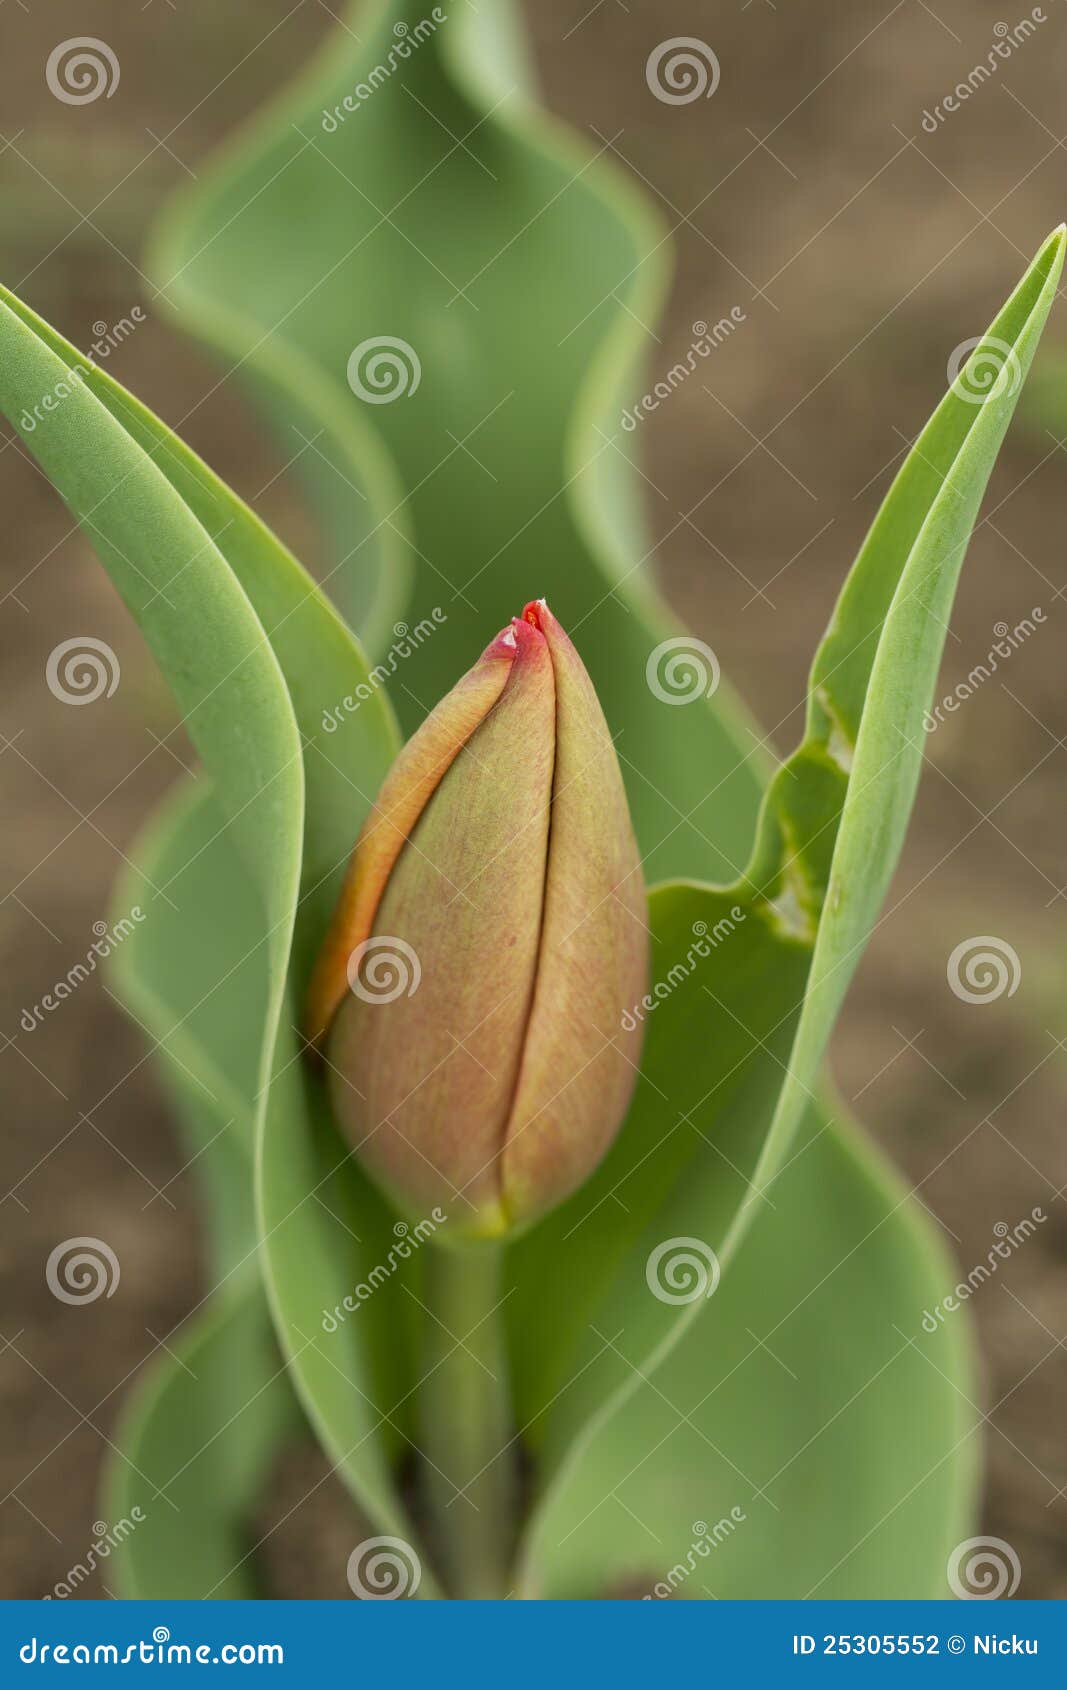 Tulip Bud Detail and Green Leafs Stock Photo - Image of small, organic ...